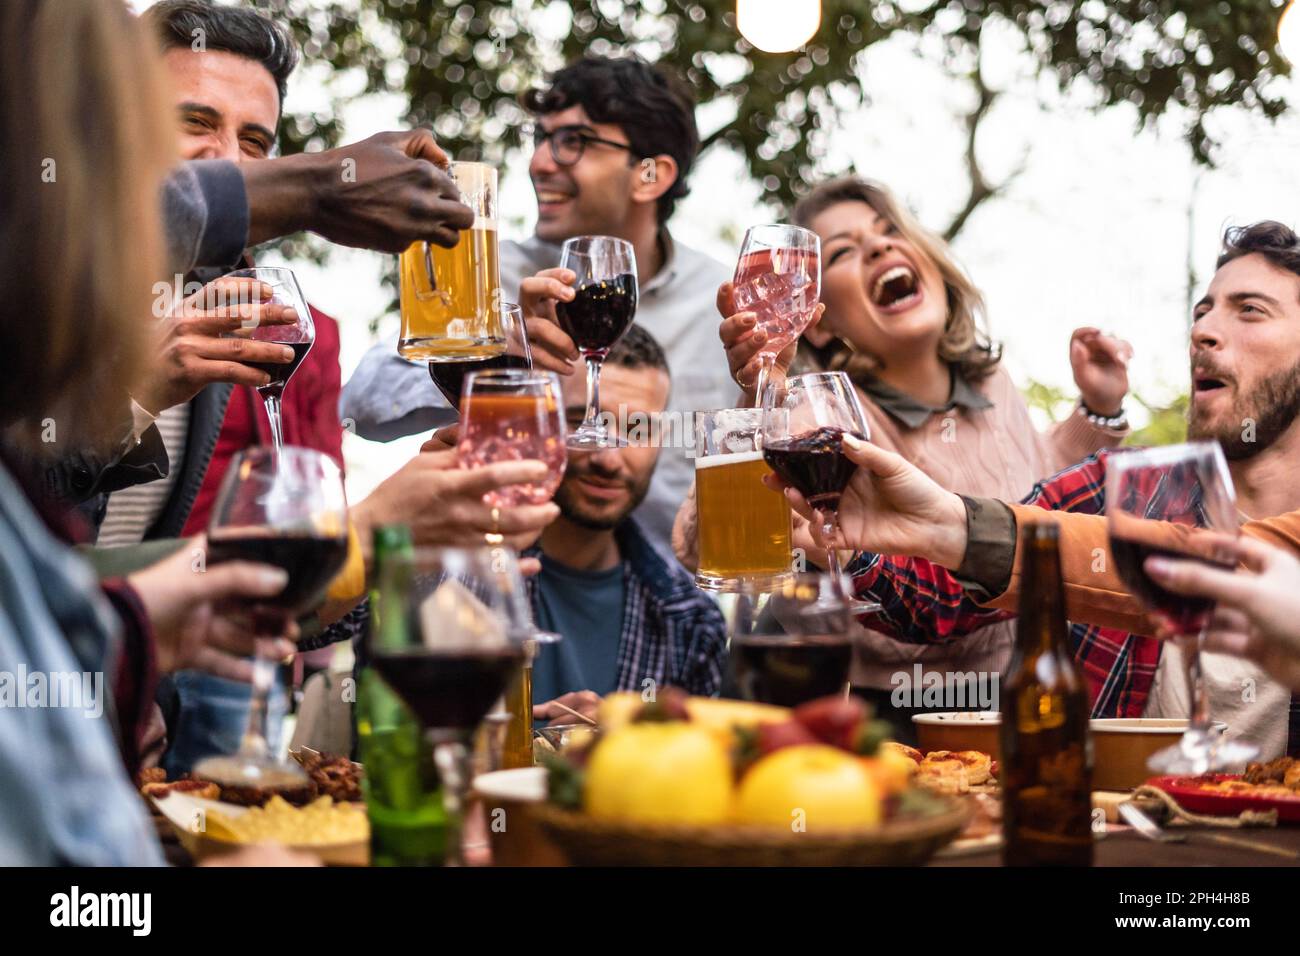 A diverse group of friends raising their glasses in a toast during a countryside picnic. The table is set with grilled meats, wine, and beer, surround Stock Photo